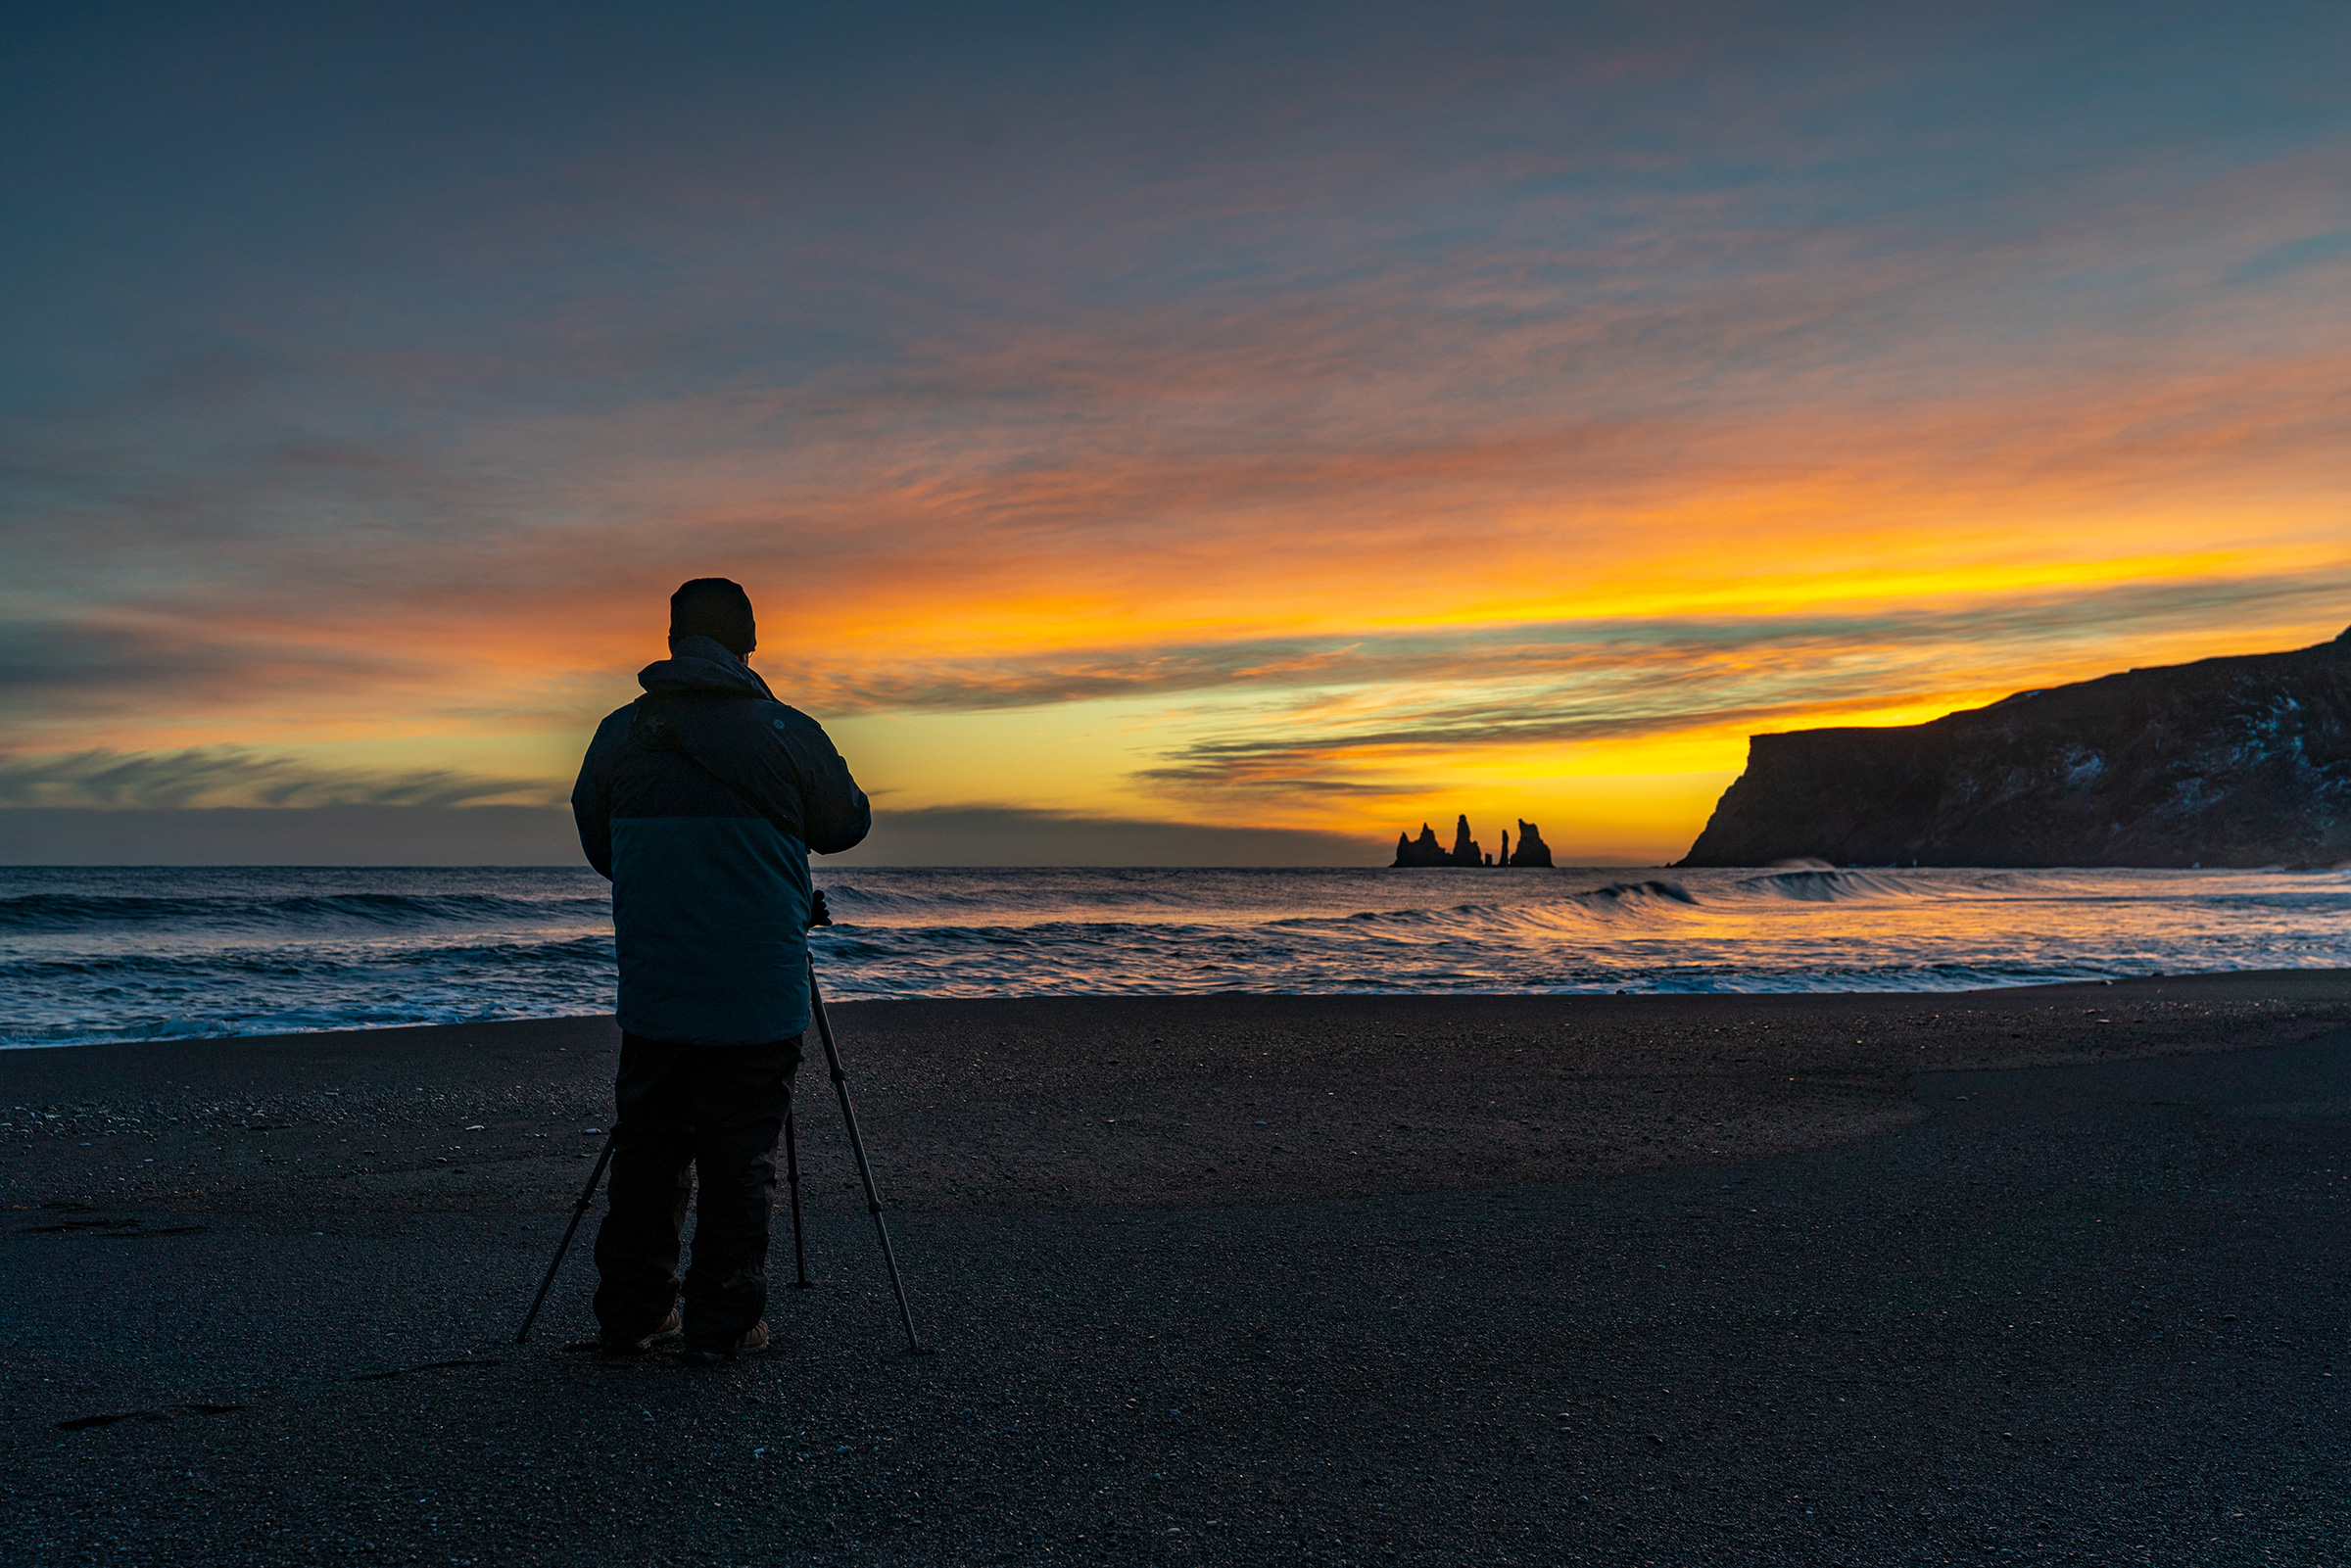 Reynisdrangar black sand beach with a man holding a camera in the foreground